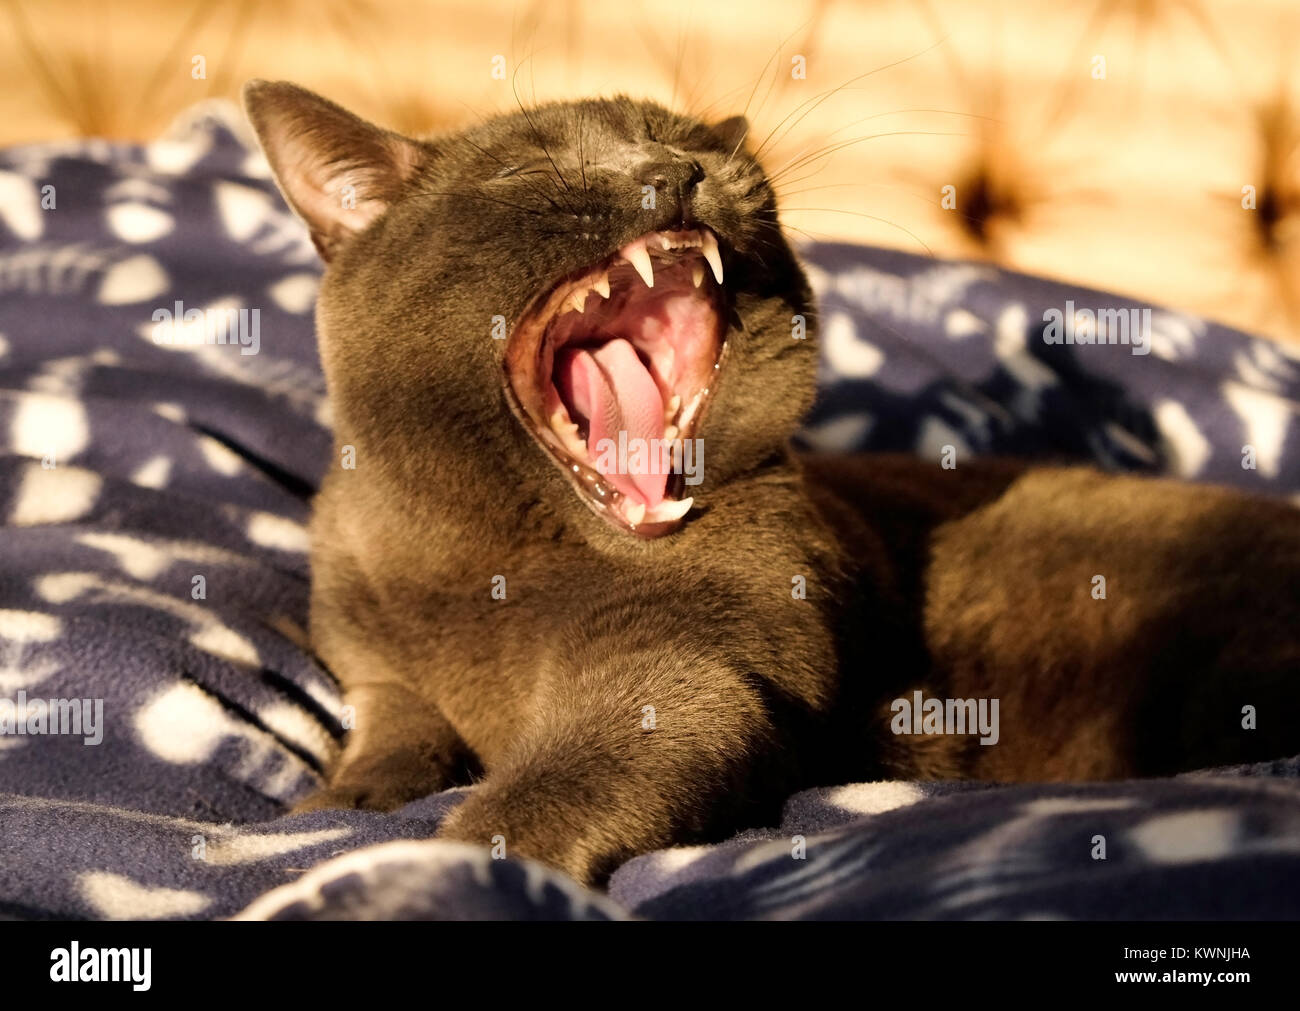 Close up of a British Blue cat’s face he has his mouth is wide open yawning showing his teeth, tongue and inside of mouth, with an out stretched paw g Stock Photo